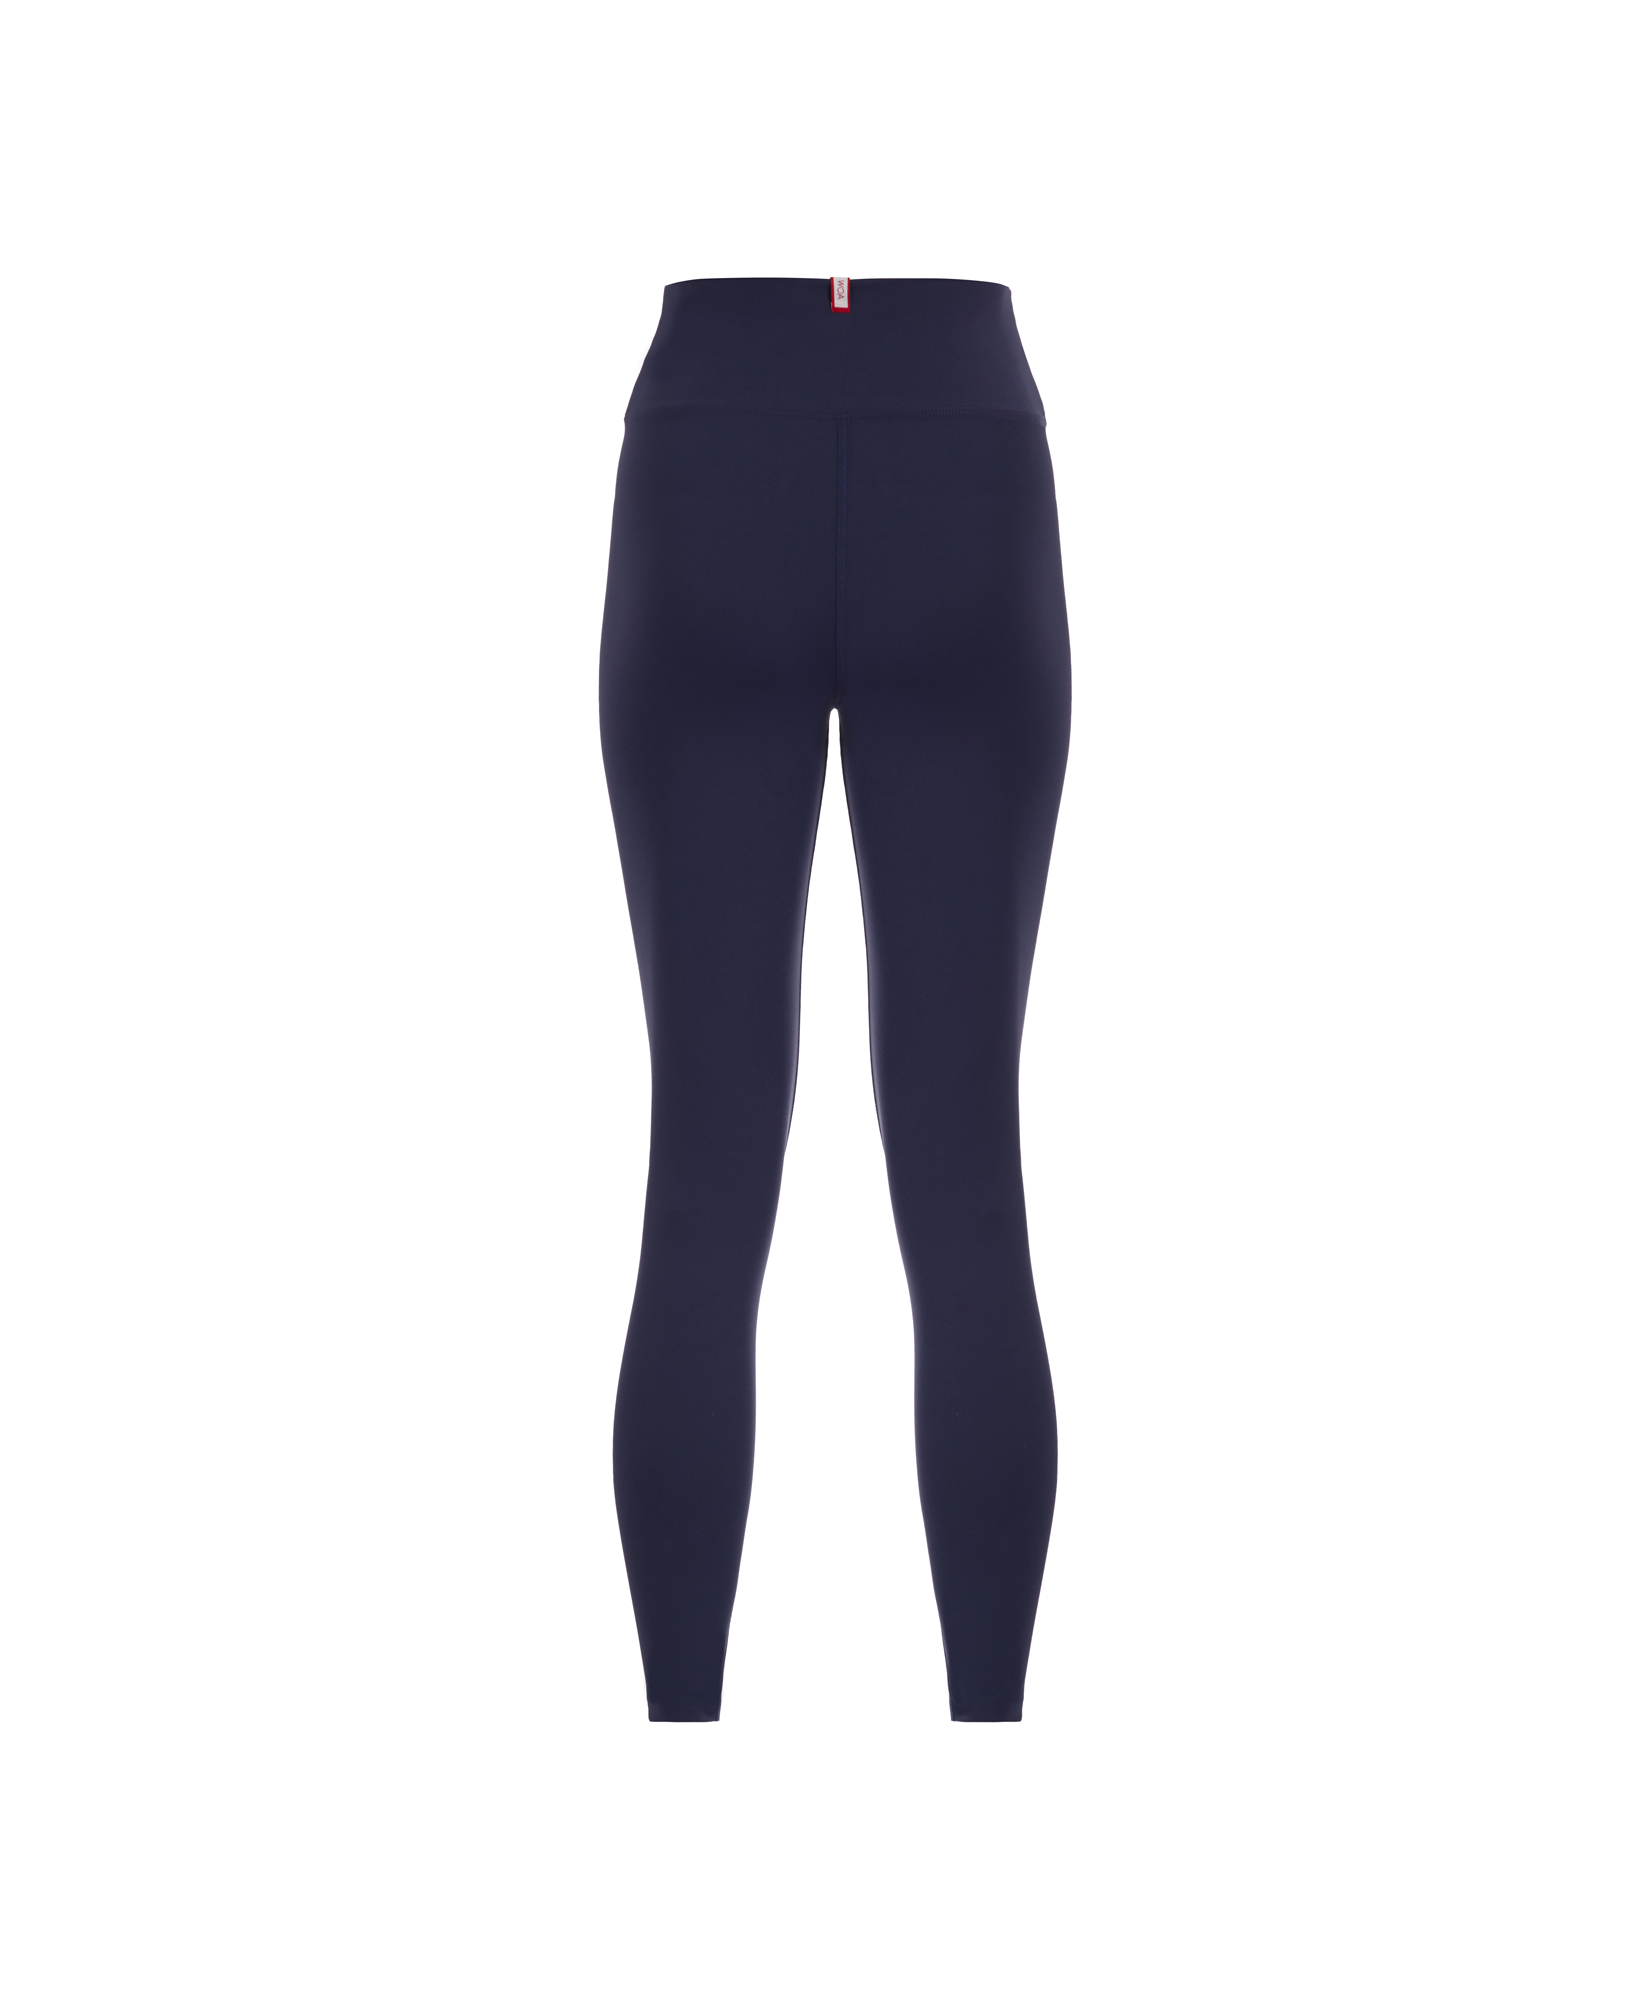 Wear One's At Routine Legging in navy on ghost mannequin back view